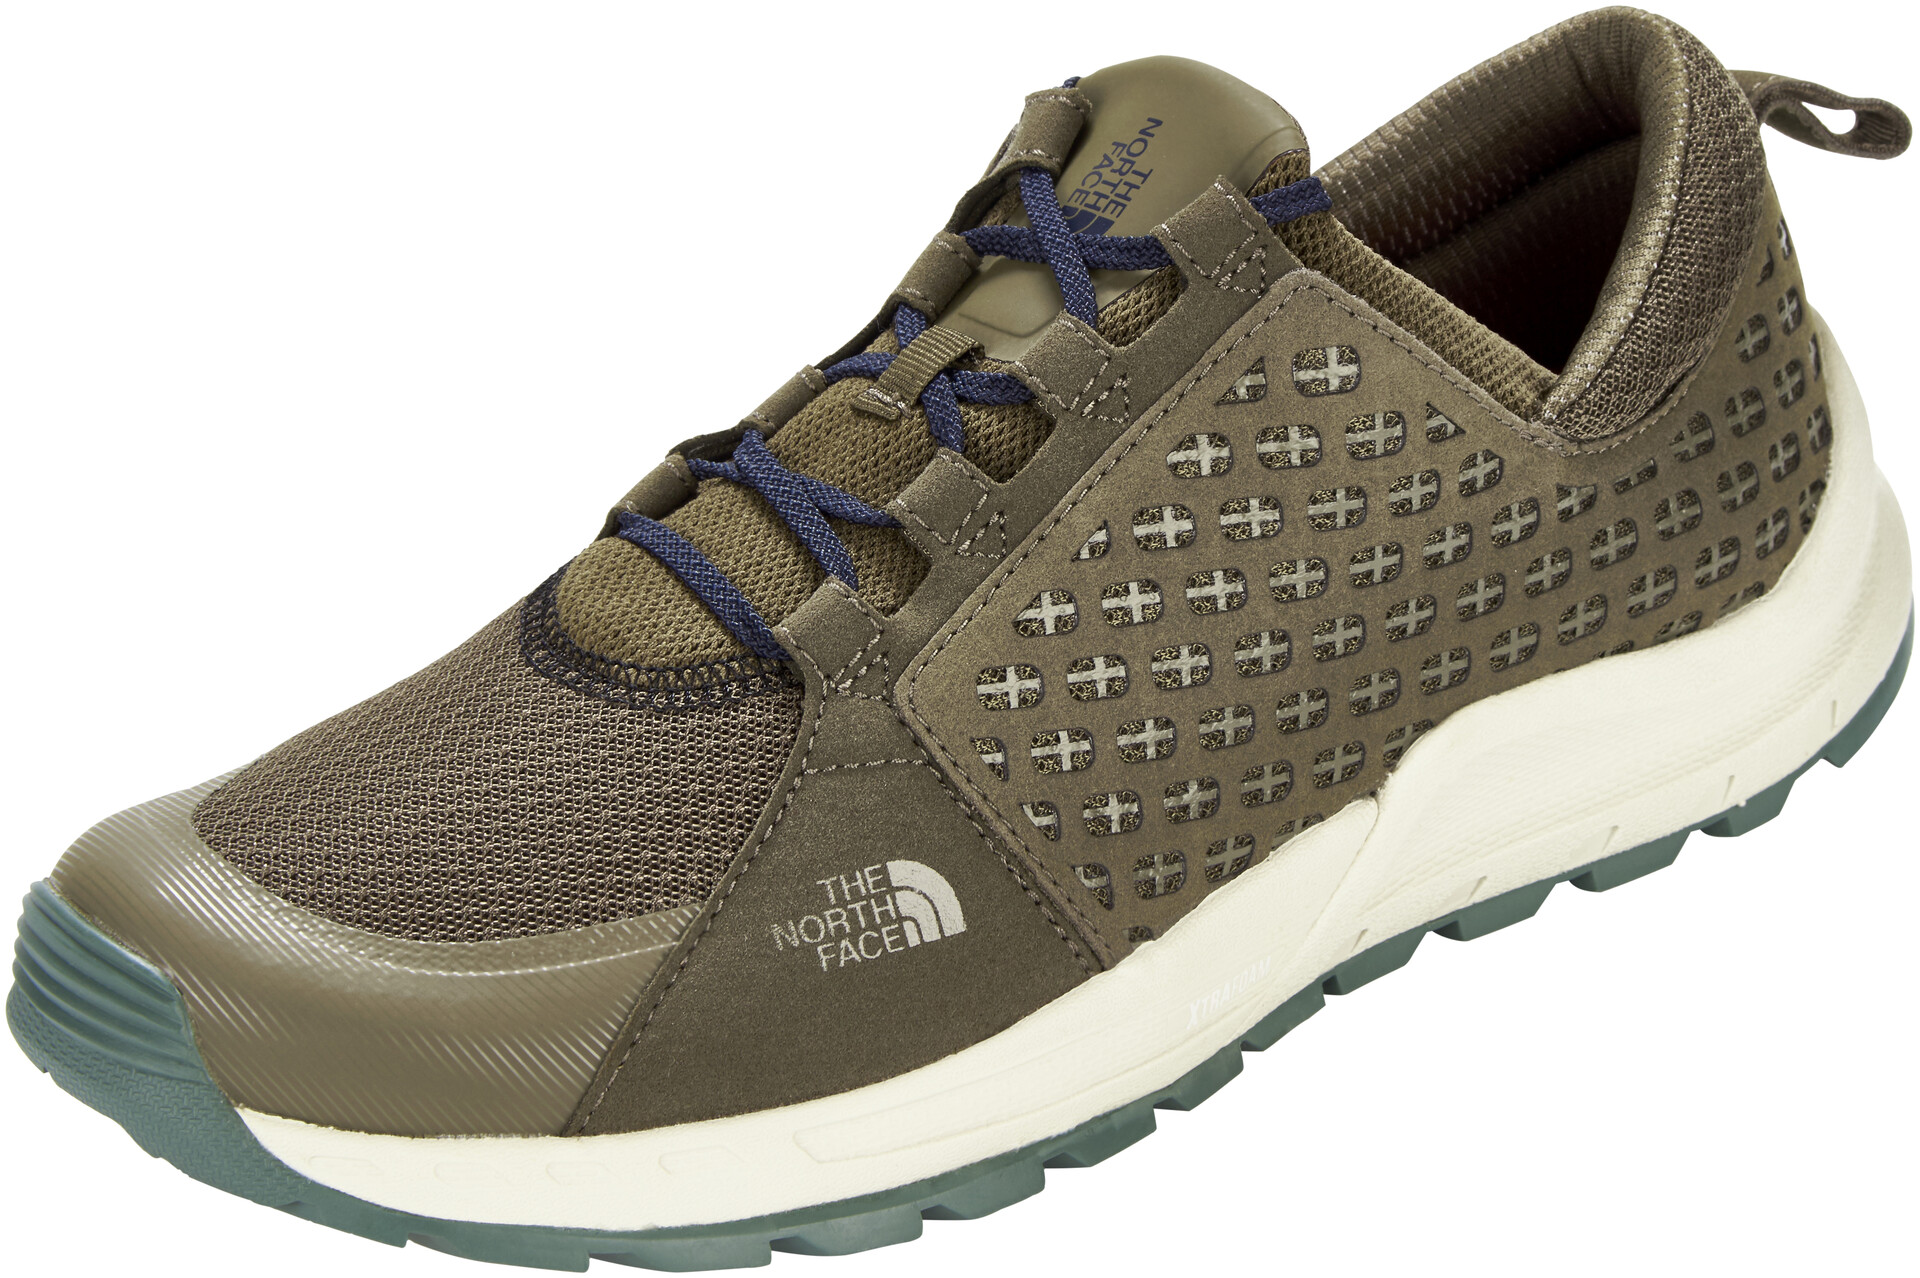 The North Face Mountain Sneakers Men 